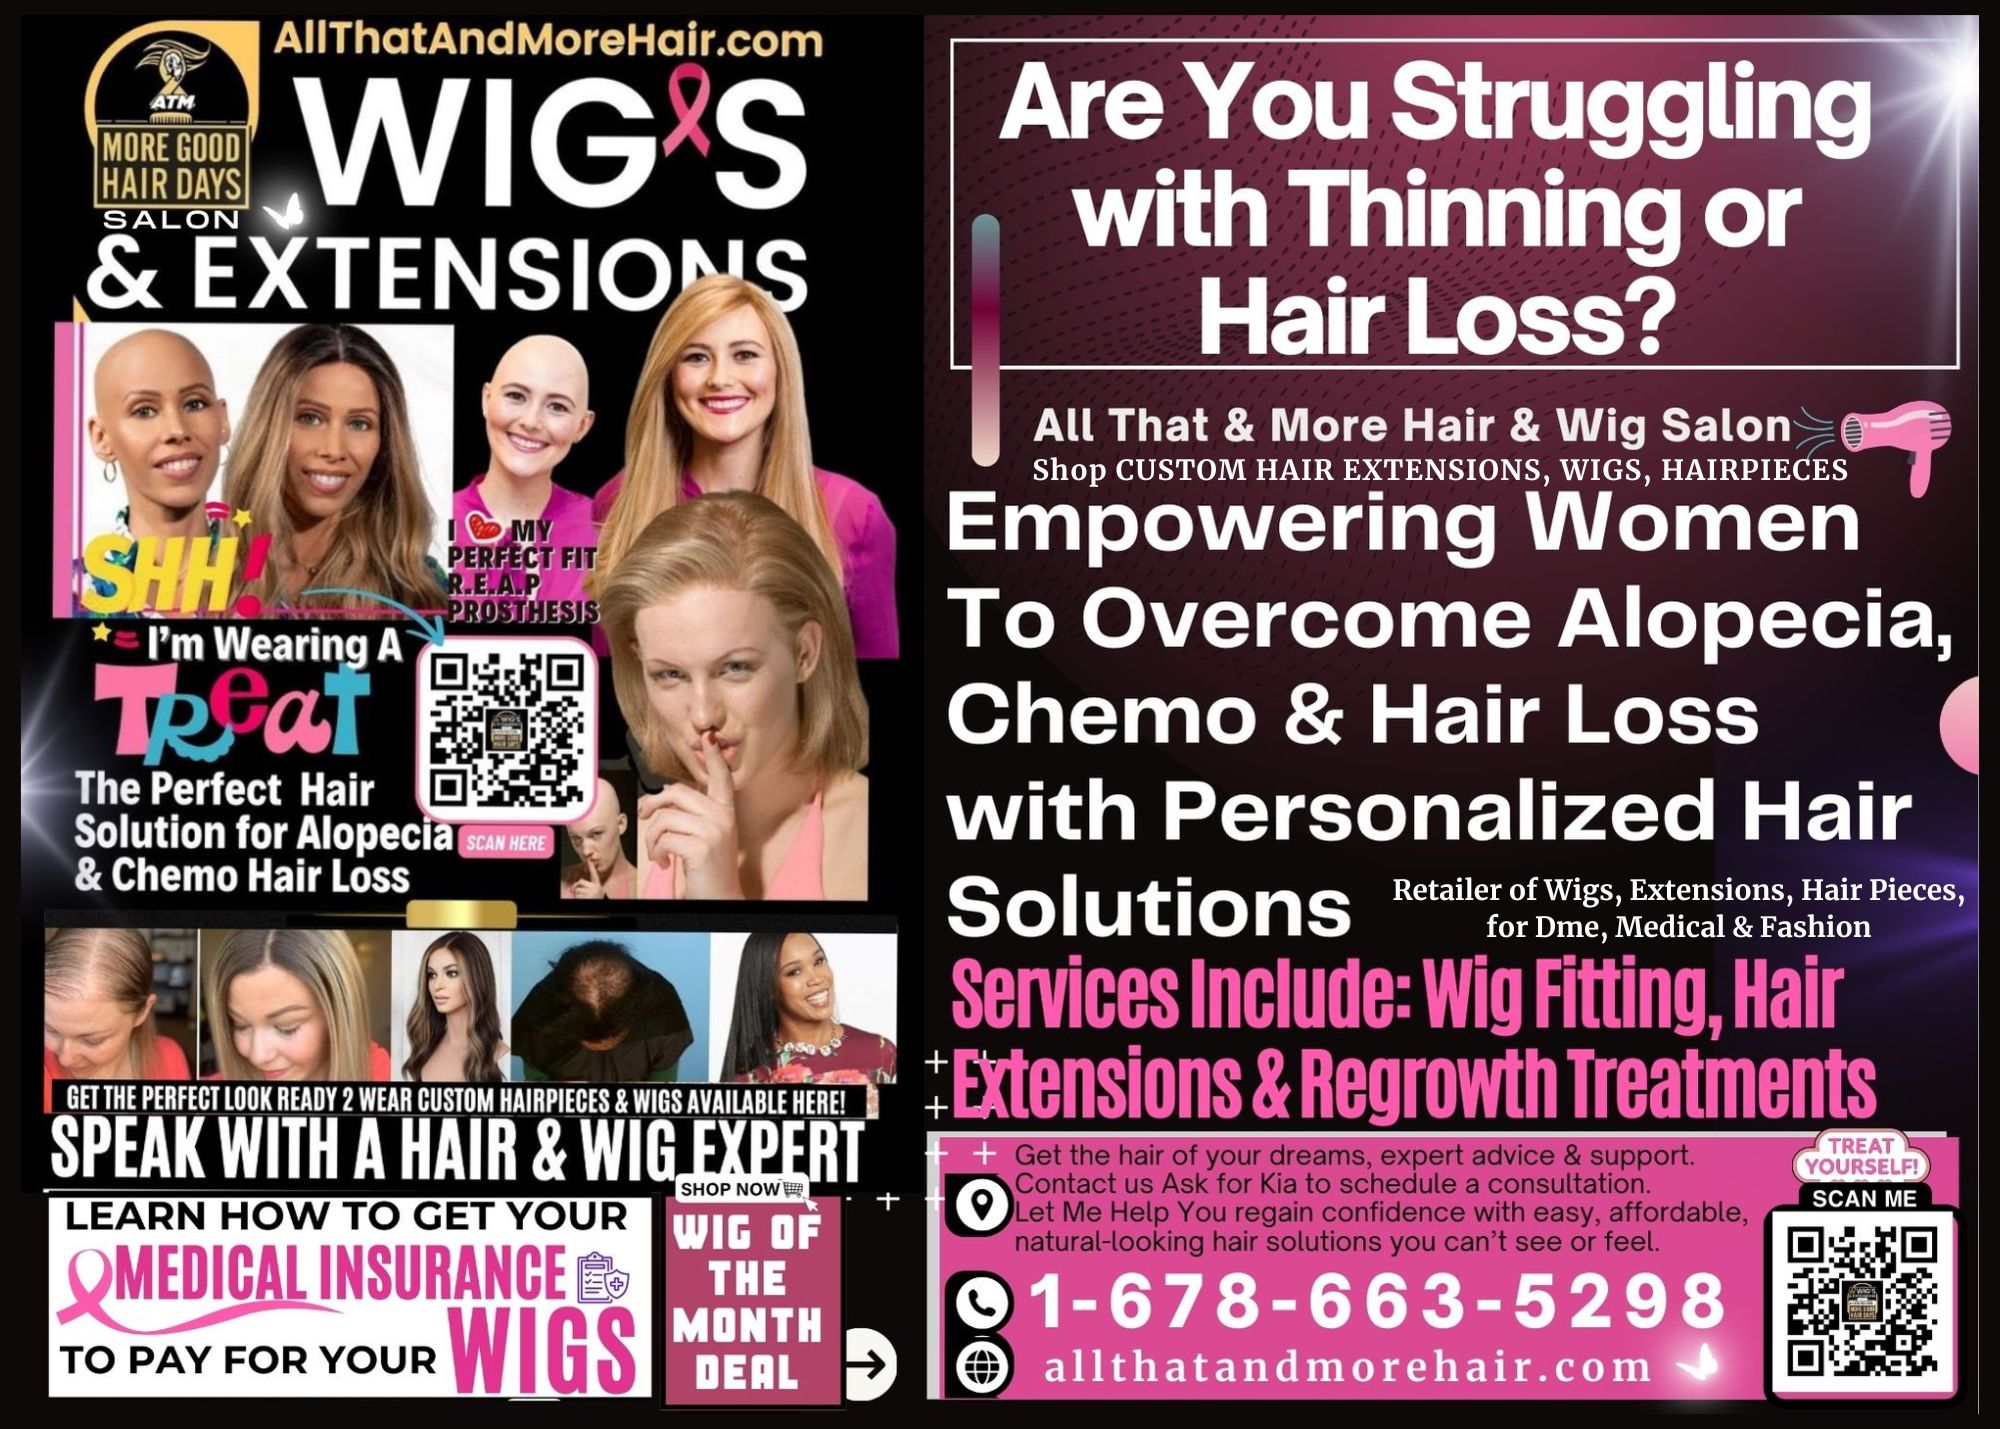 Custom Hair Extensions, Wigs, Hairpieces & Non-Surgical Hair Replacement Solutions Private 1-on-1 Alopecia & Cancer Hair Loss Support Available!